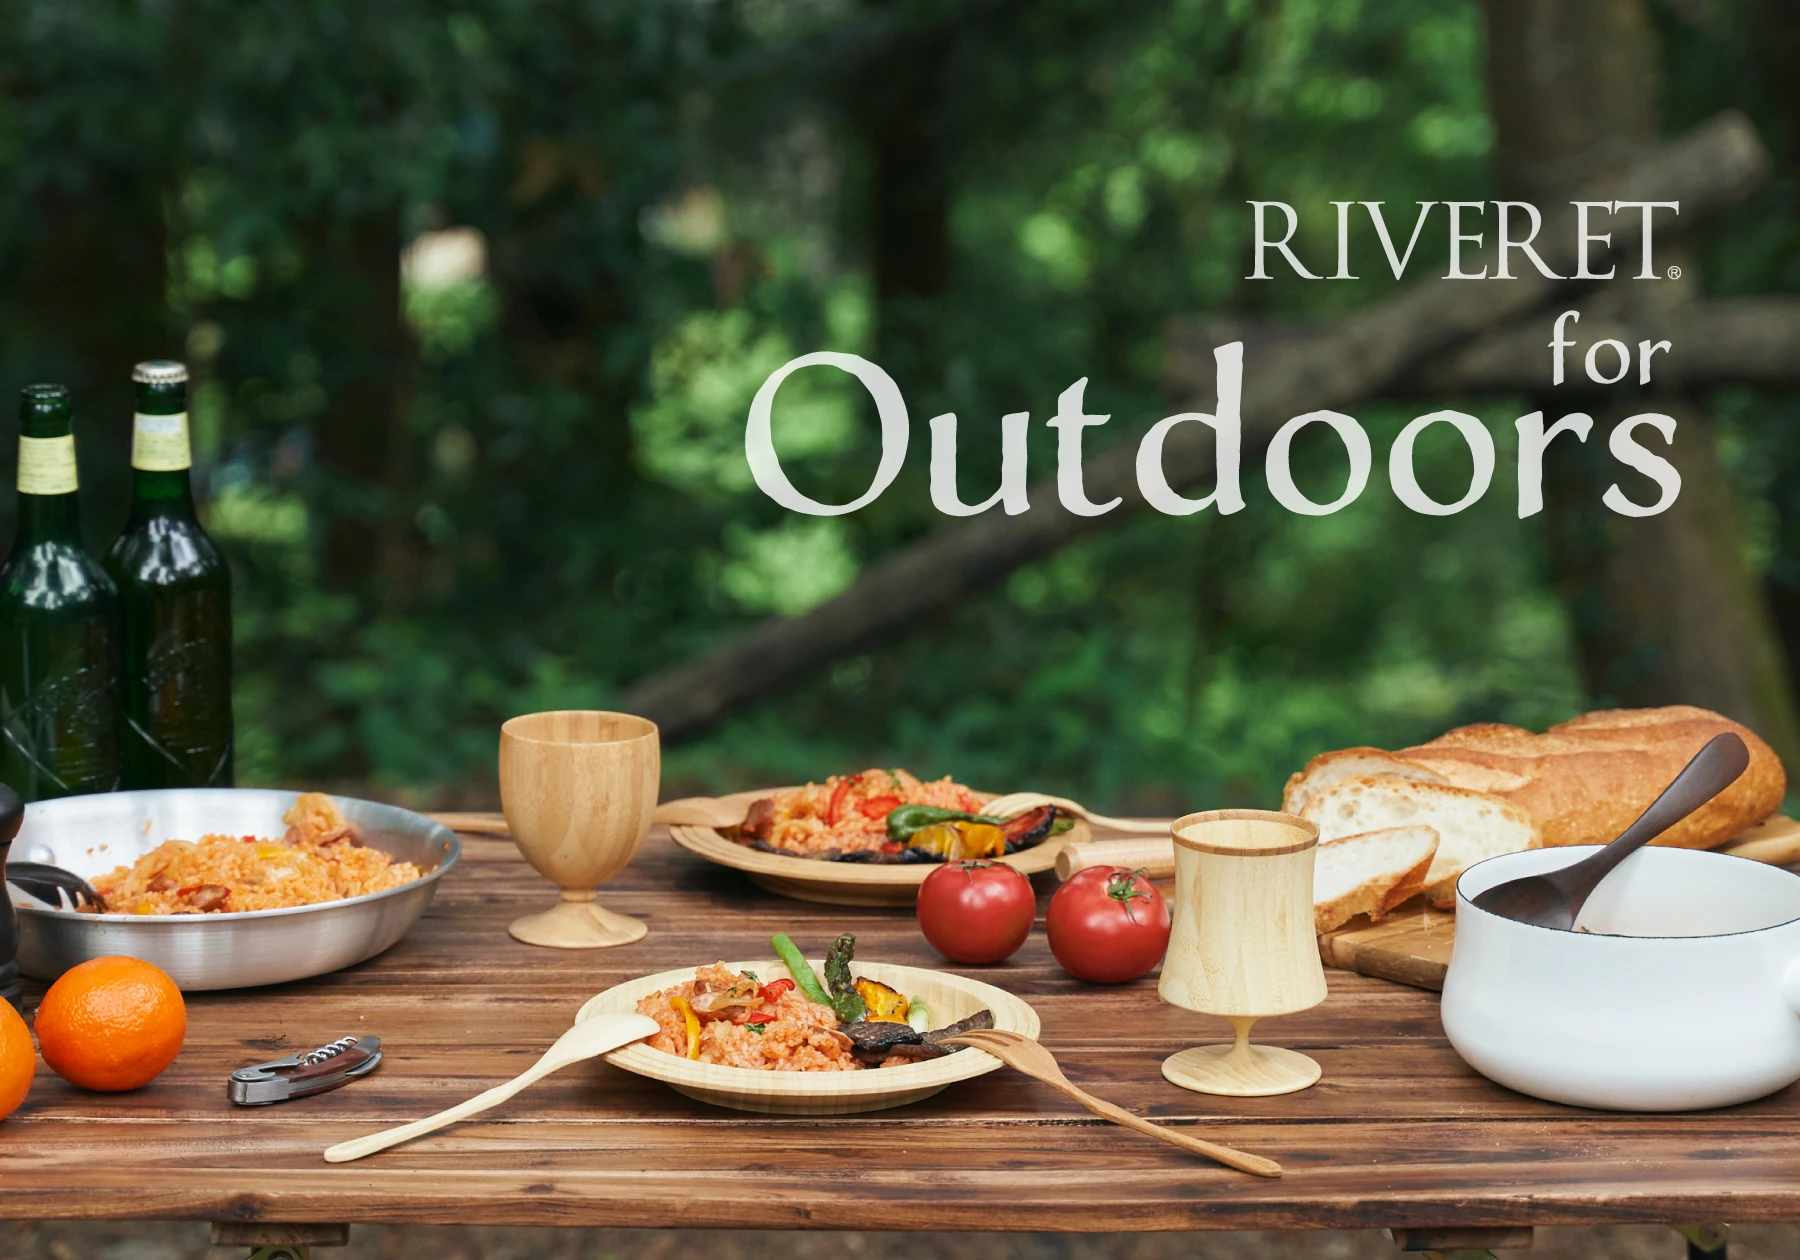 RIVERET for outdoors